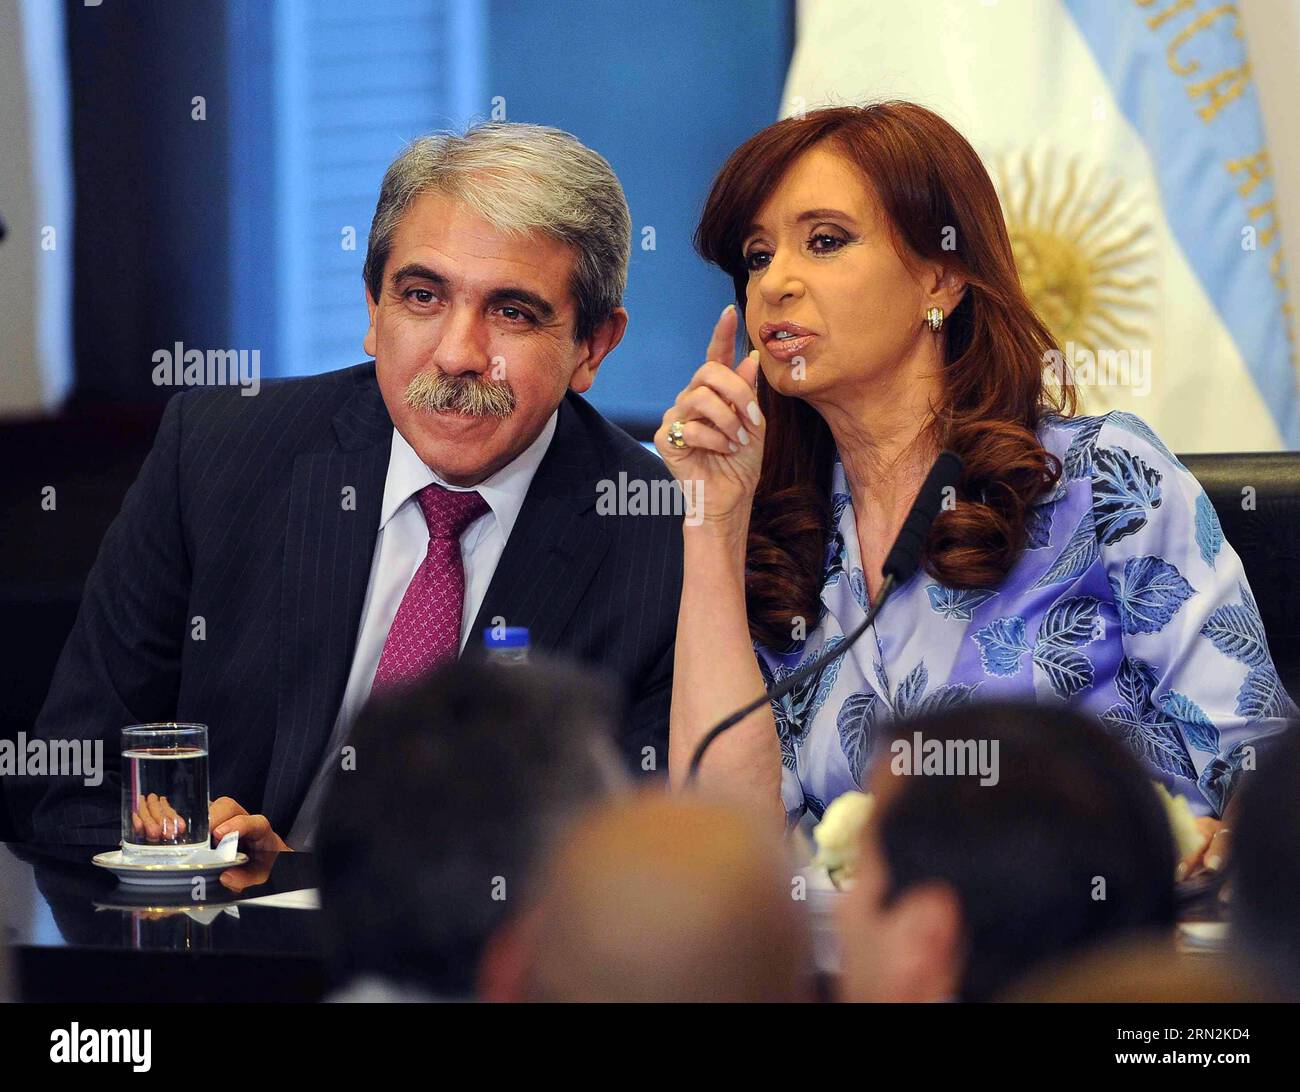 BUENOS AIRES, March 12, 2015 -- Argentina s President Cristina Fernandez de Kirchner (R) talks with Anibal Fernandez (L), head of Ministers Cabinet, during an act at Casa Rosada, in Buenos Aires, Argentina, on March 12, 2015. Cristina Fernandez de Kirchner announced Thursday an increase in grants and scholarships for middle and high schools students, according to local press. Raul Ferrari/TELAM) (dh) ARGENTINA-BUENOS AIRES-POLITICS-FERNANDEZ TELMA PUBLICATIONxNOTxINxCHN   Buenos Aires March 12 2015 Argentina S President Cristina Fernandez de Kirchner r Talks With Anibal Fernandez l Head of Min Stock Photo